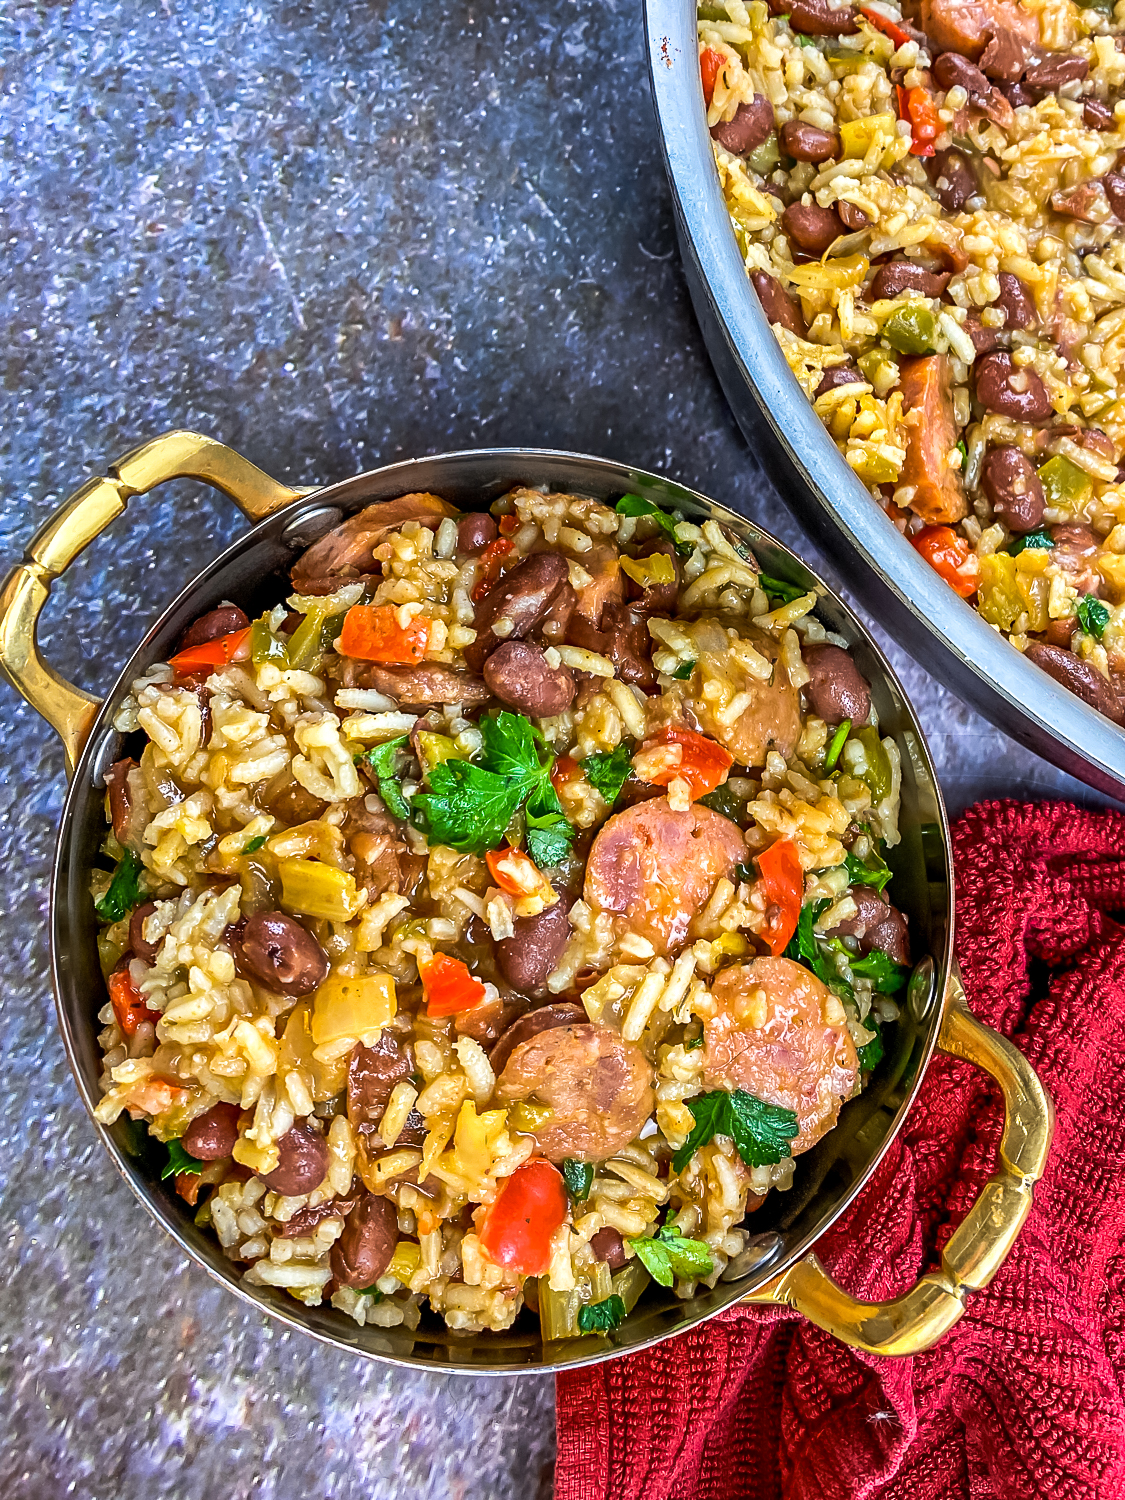 Whether you're in a hurry or have all day, this easy Cajun red beans and rice with sausage recipe is sure to please as a tasty meal or side.